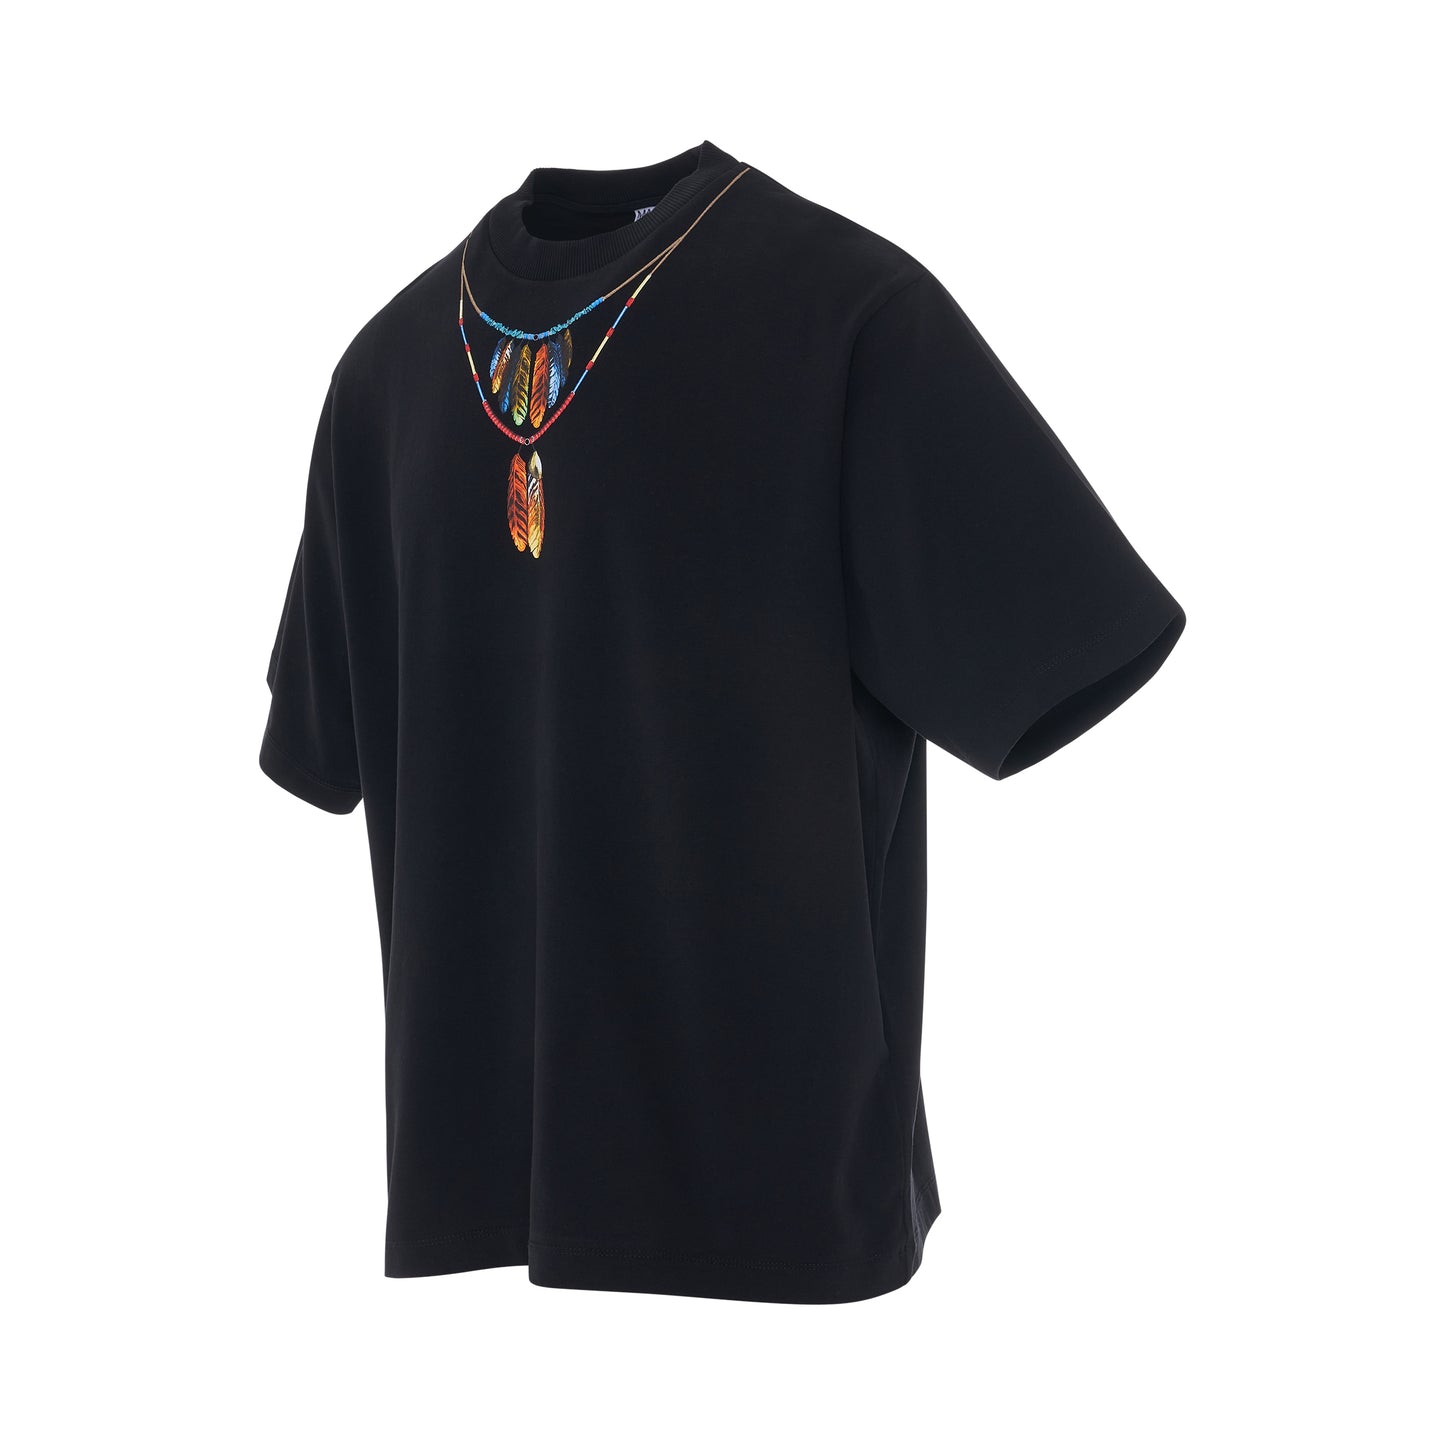 Feathers Necklace Oversized T-Shirt in Black